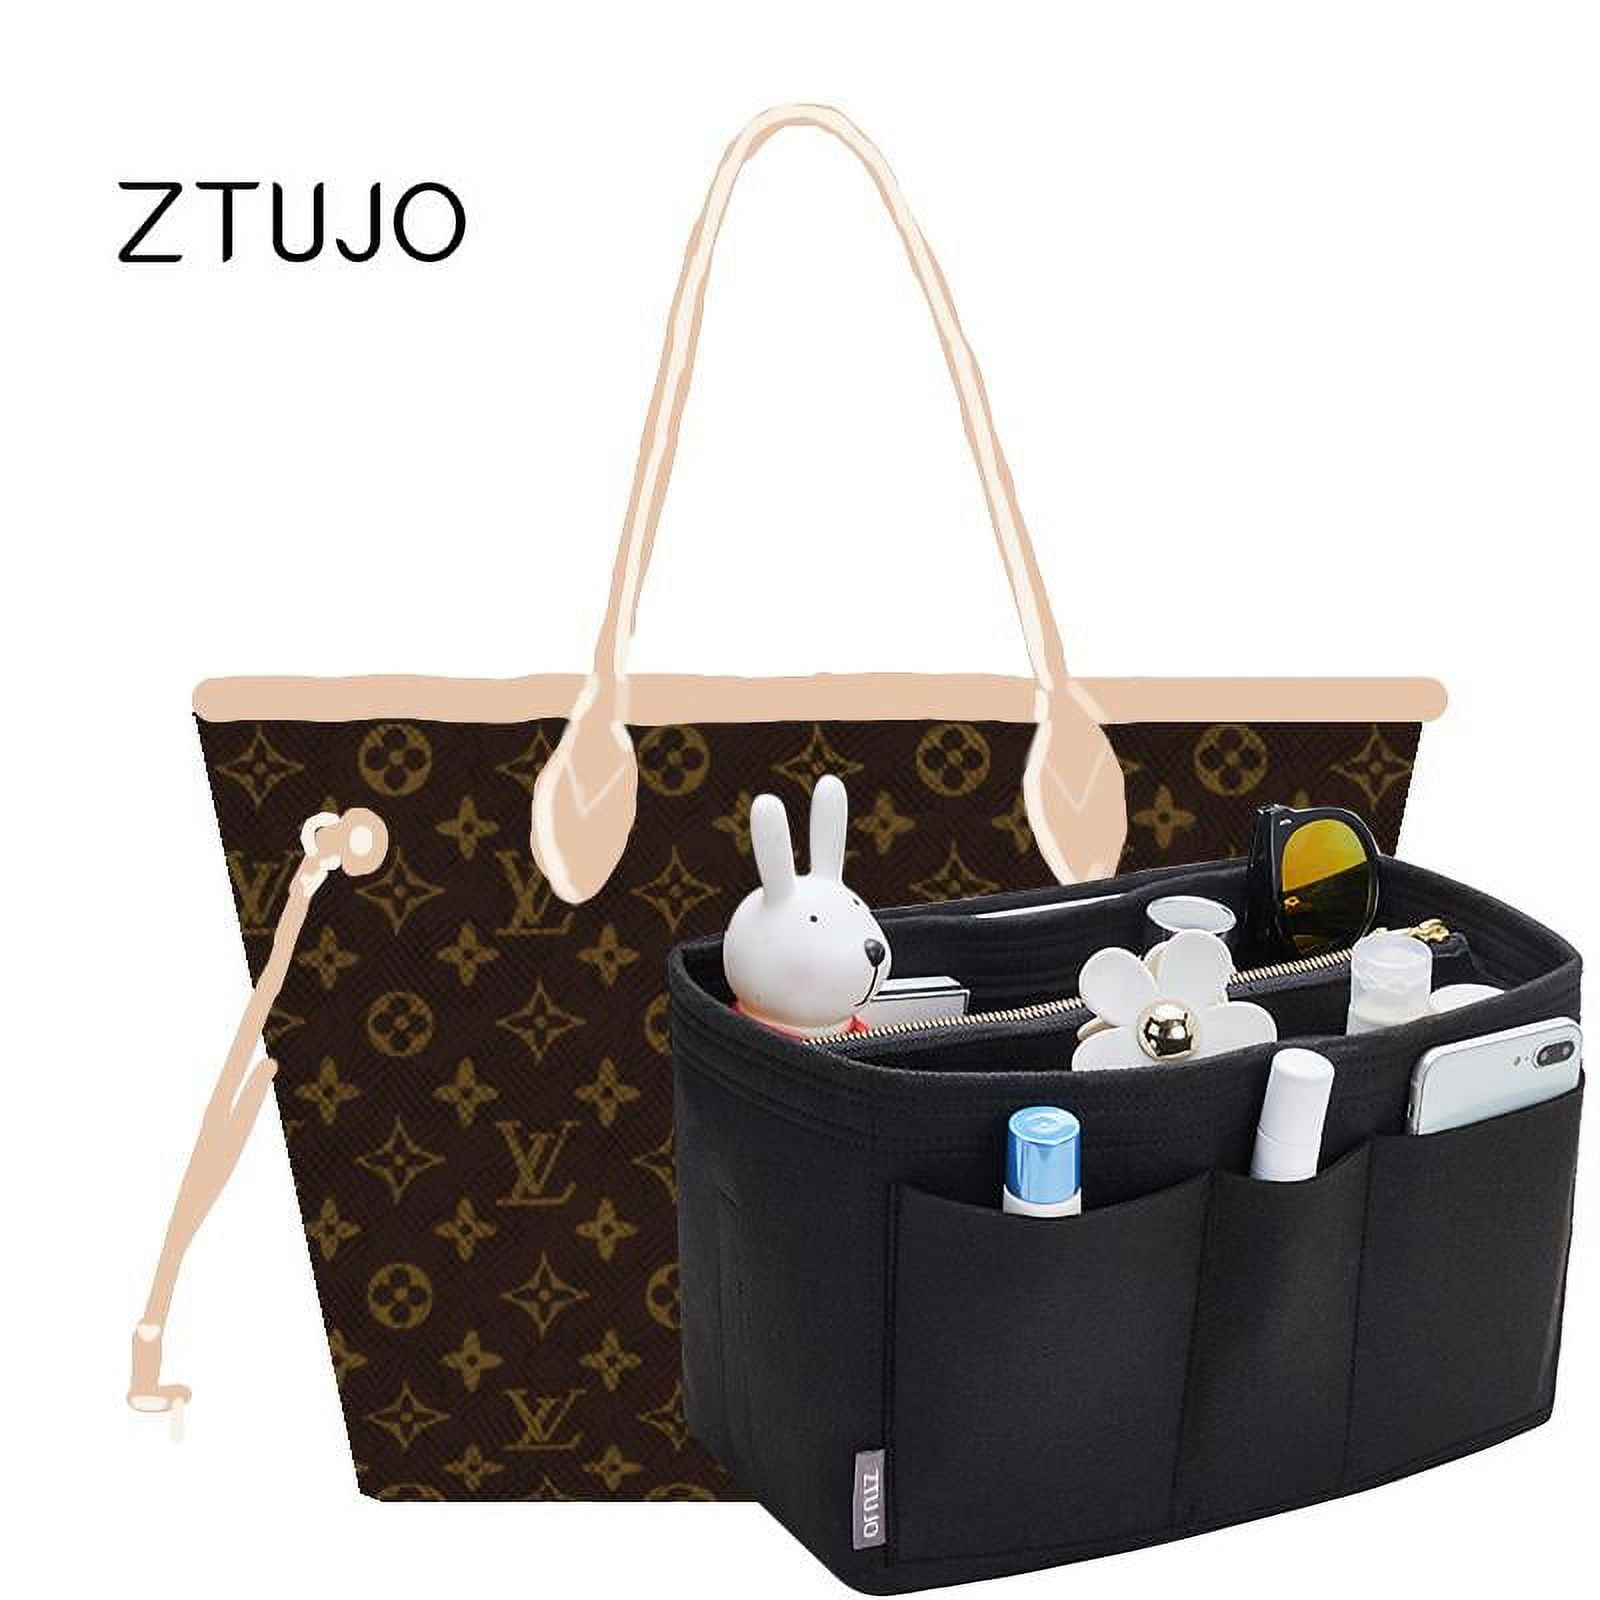 Purse Organizer for Louis Vuitton Neverfull Tote Bags - Purse Bling